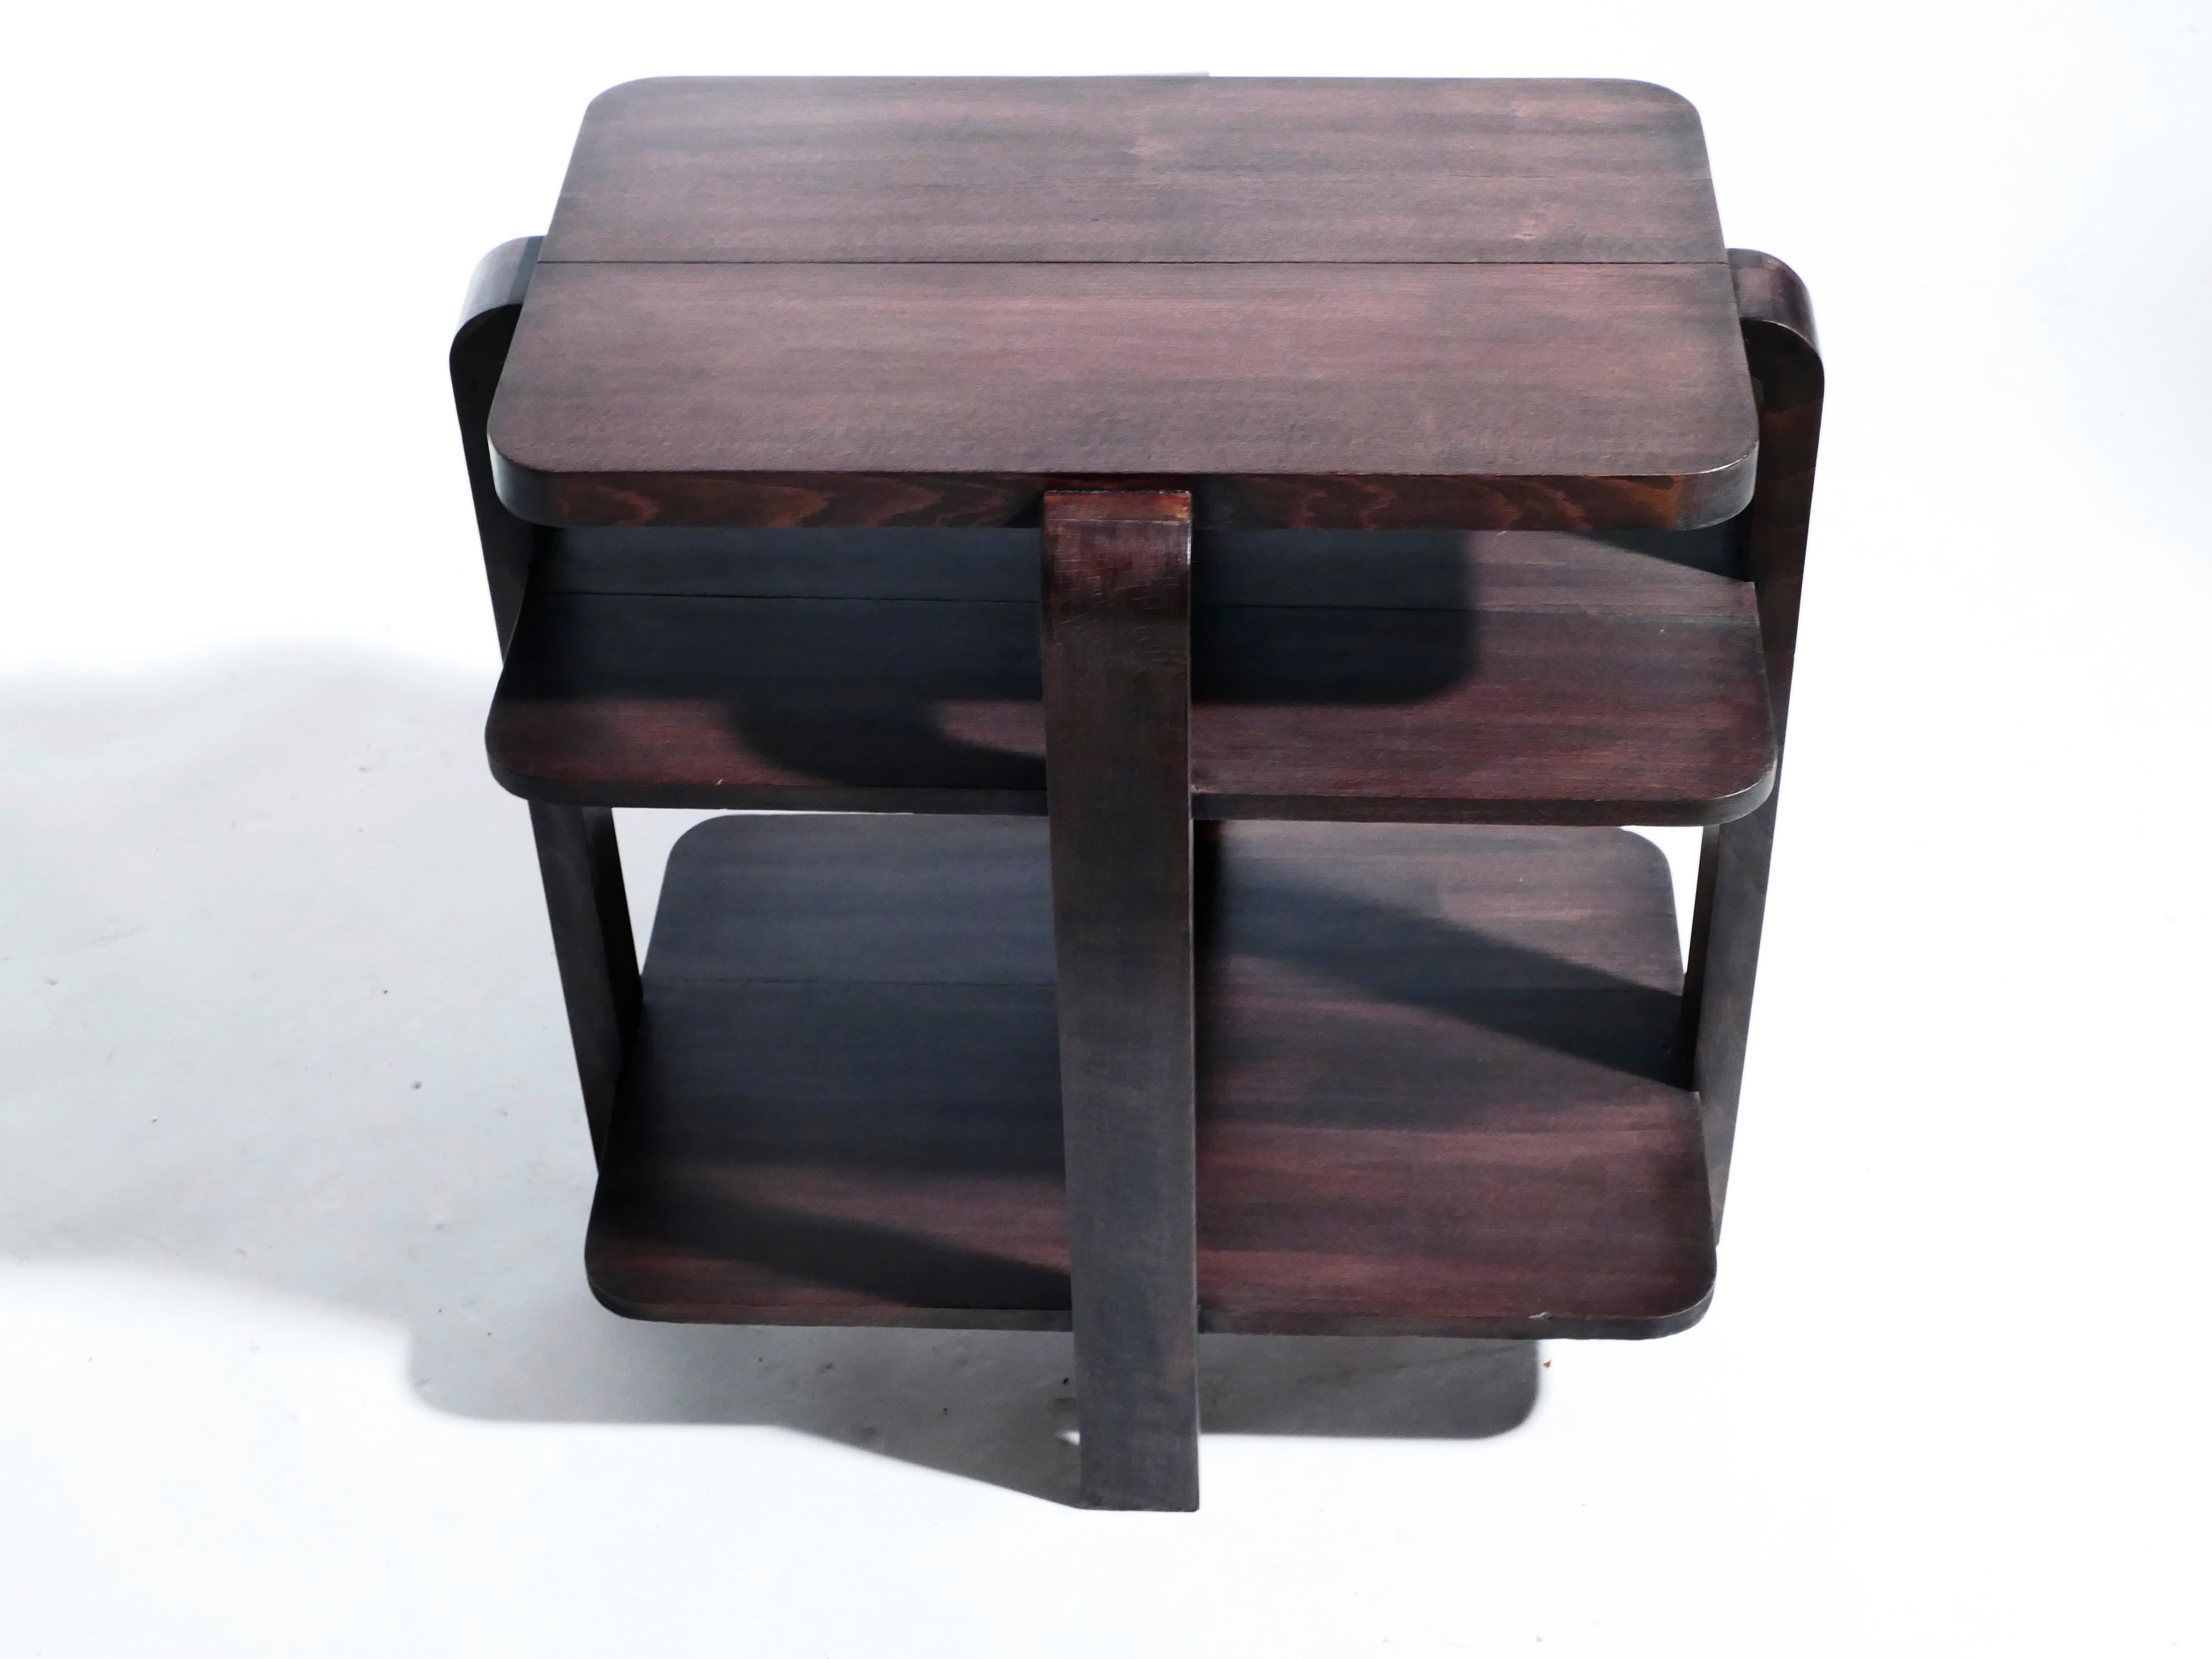 French Art Deco Modernist Mahogany Side Table, 1940s For Sale 3